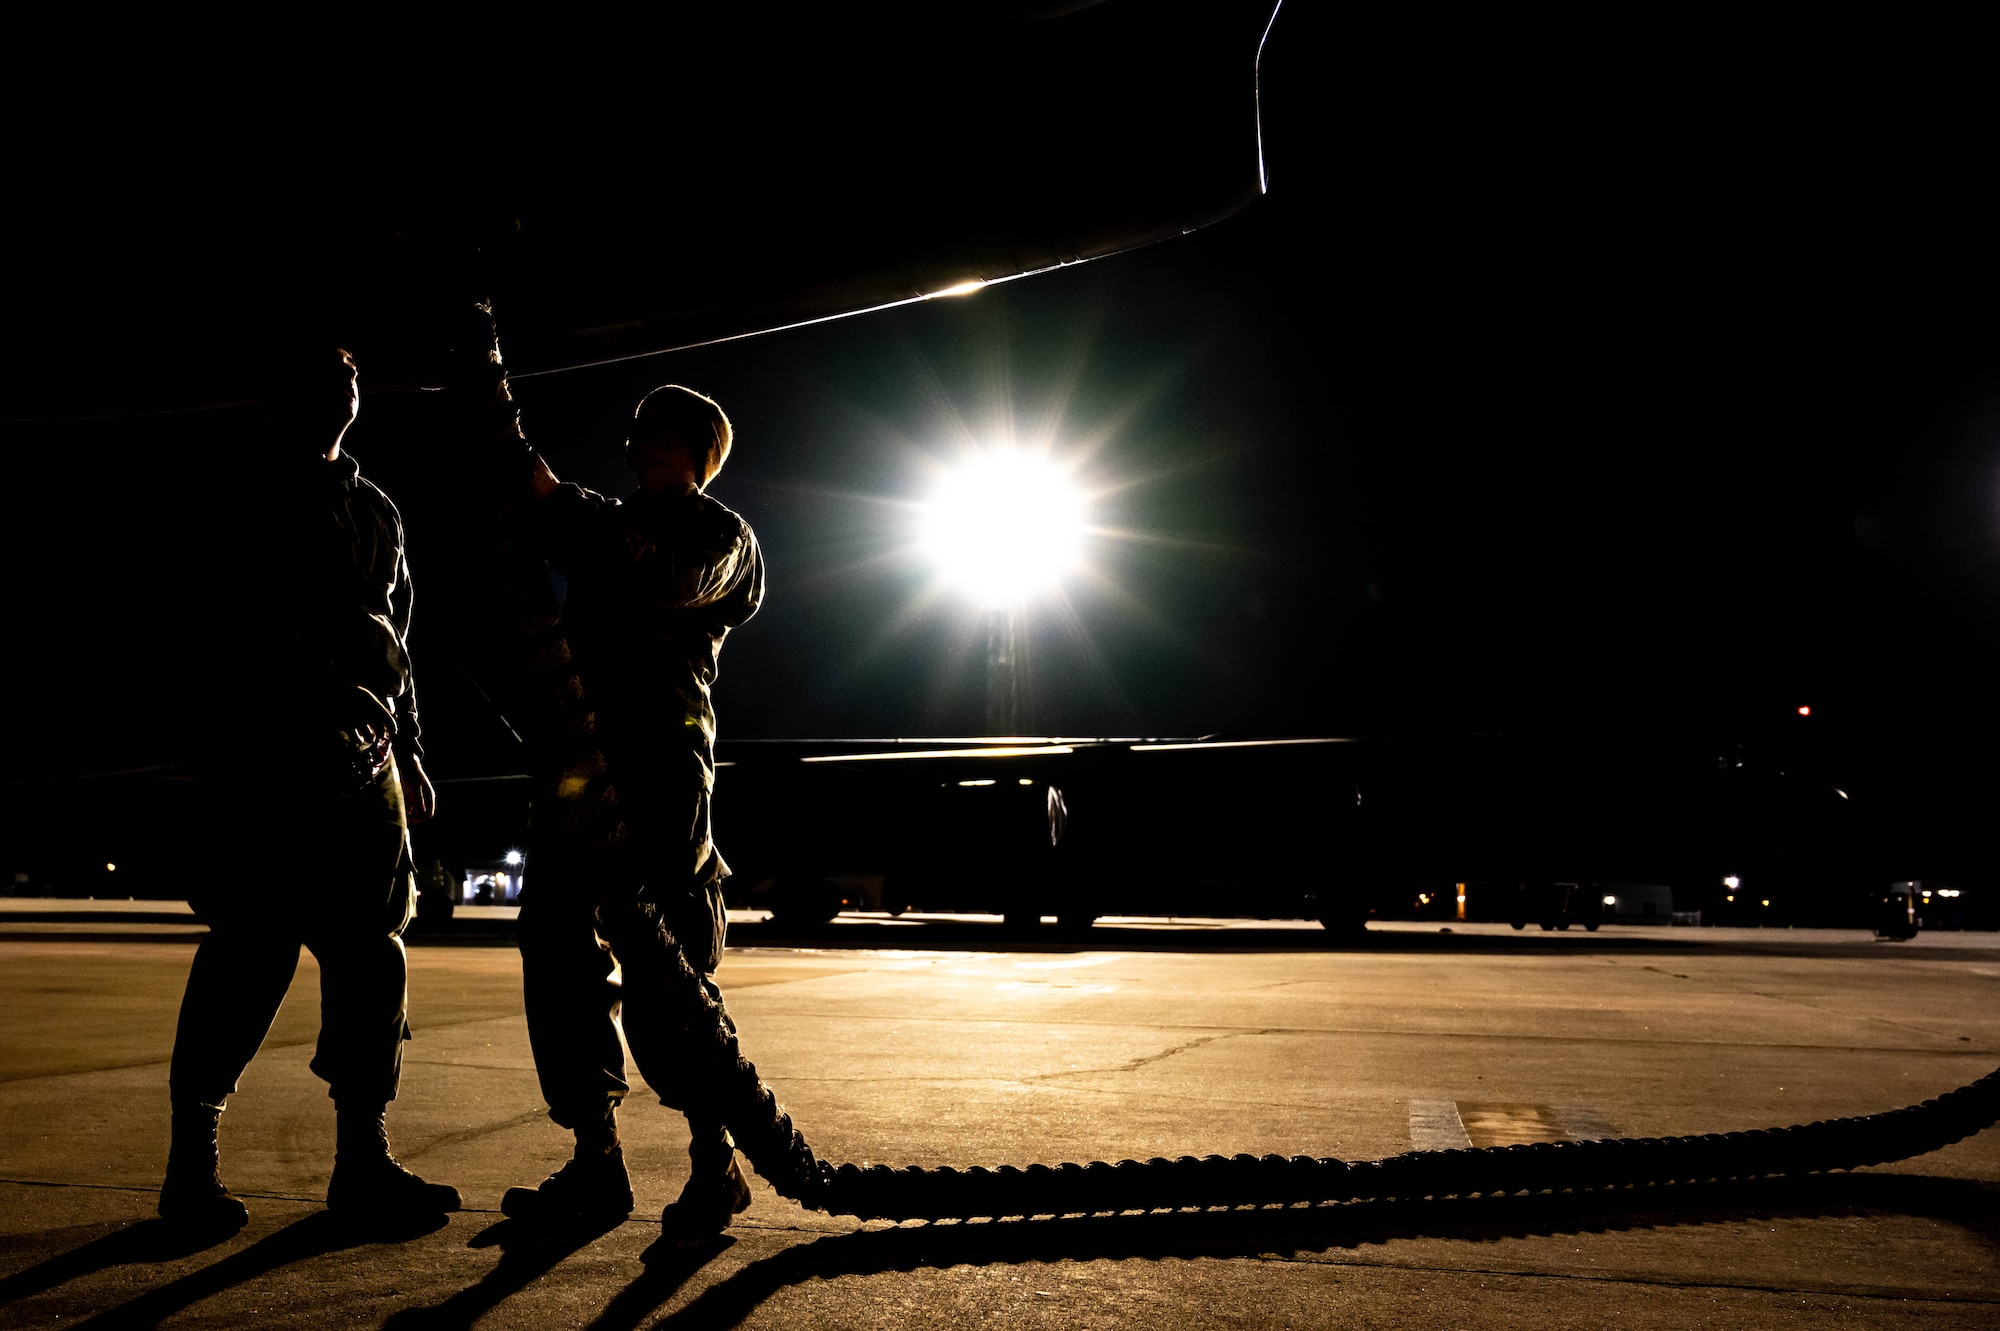 Crew chiefs assigned to the 23rd Expeditionary Bomb Squadron, prepare a B-52H Stratofortress for takeoff at Morón Air Base, Spain, Feb. 28, 2023. U.S. Strategic Command forces are on watch 24/7/365 to deter and detect strategic attacks against the U.S. and our Allies. (U.S. Air Force photo by Airman 1st Class Alexander Nottingham)